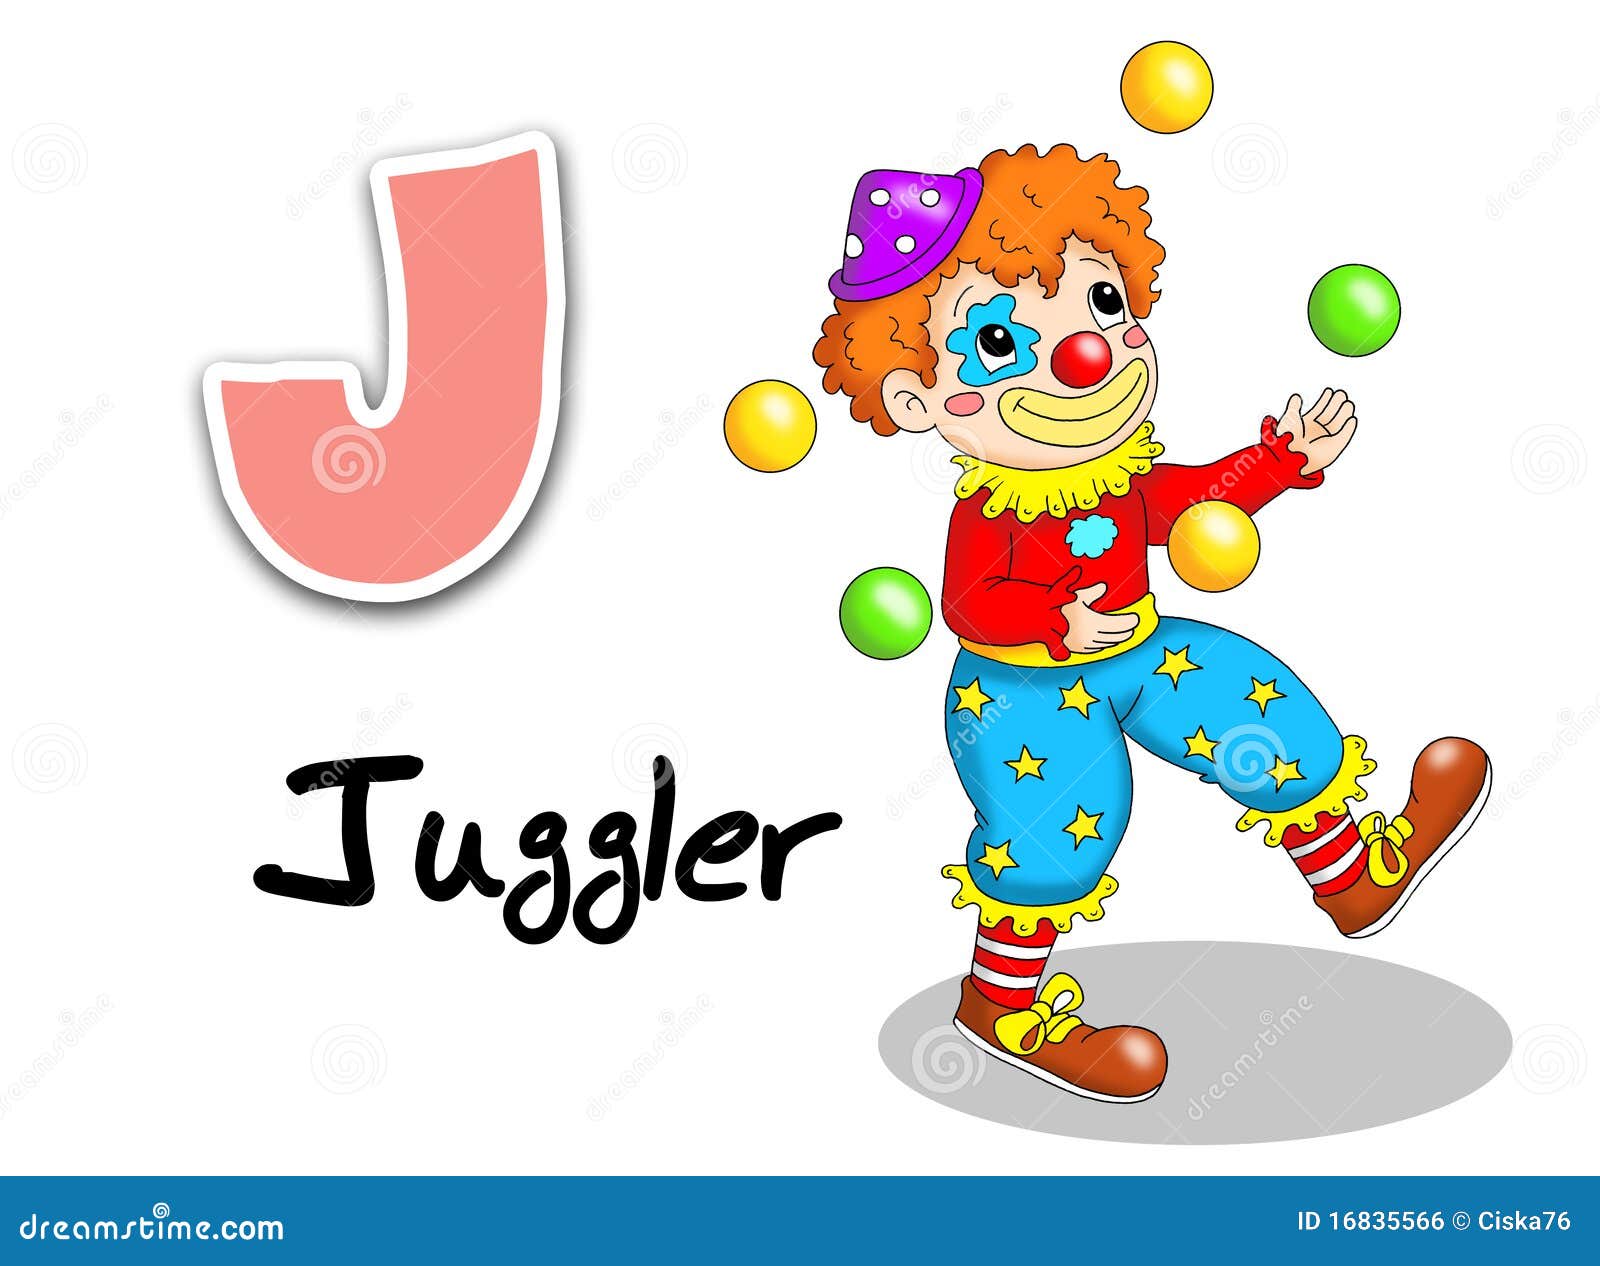 juggling clipart free - photo #36